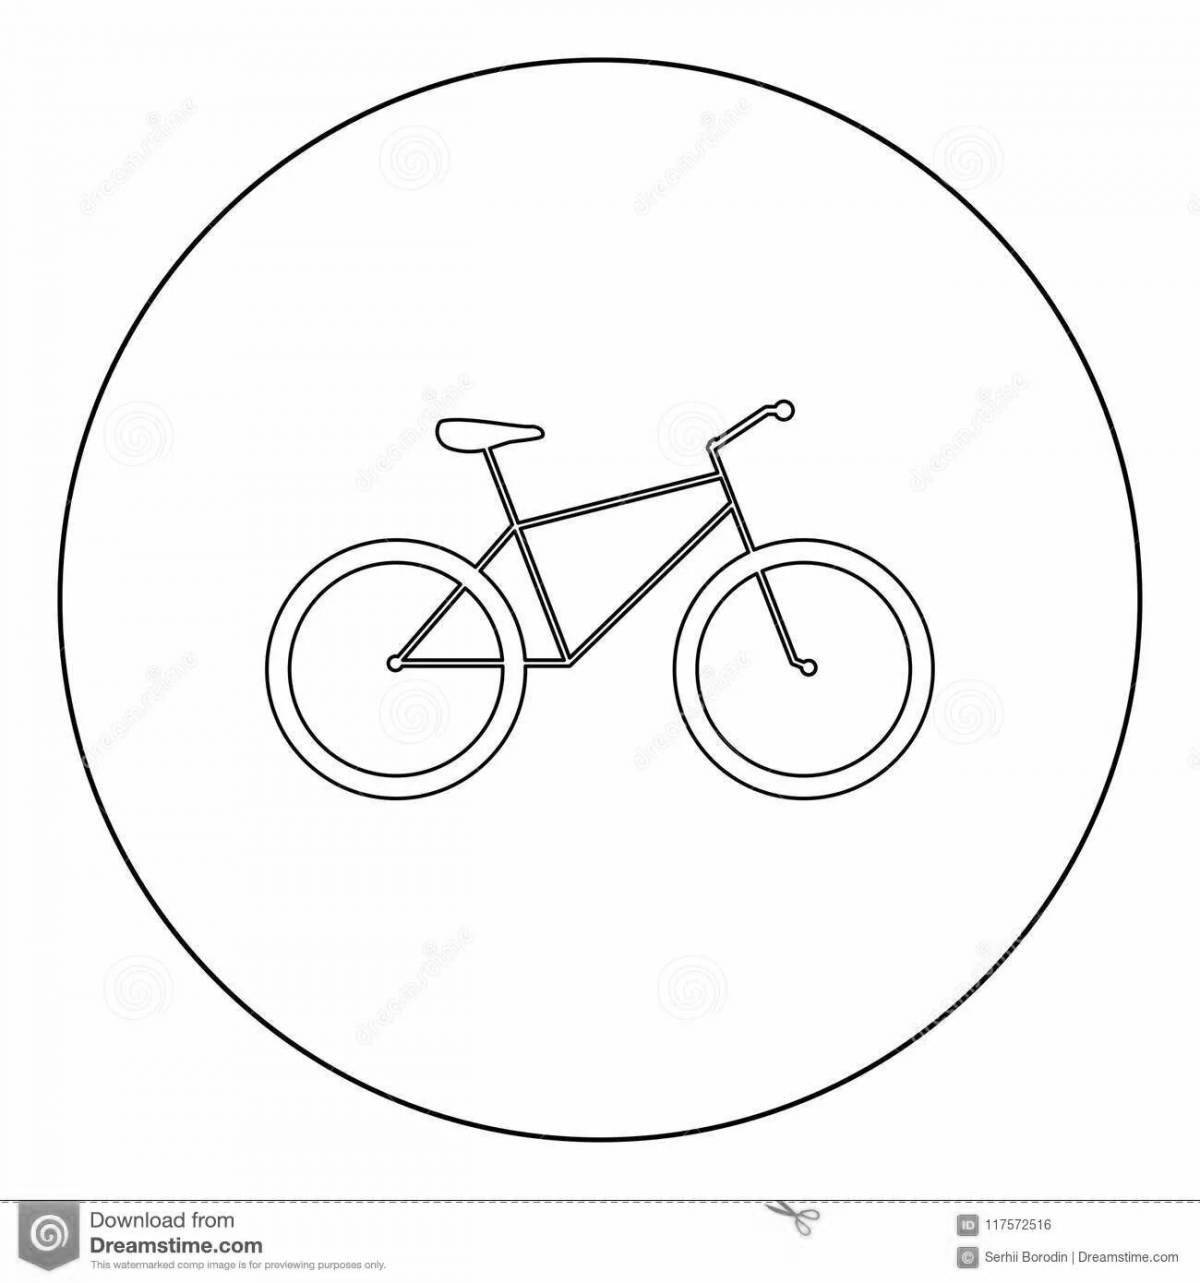 Coloring page glowing no bike sign